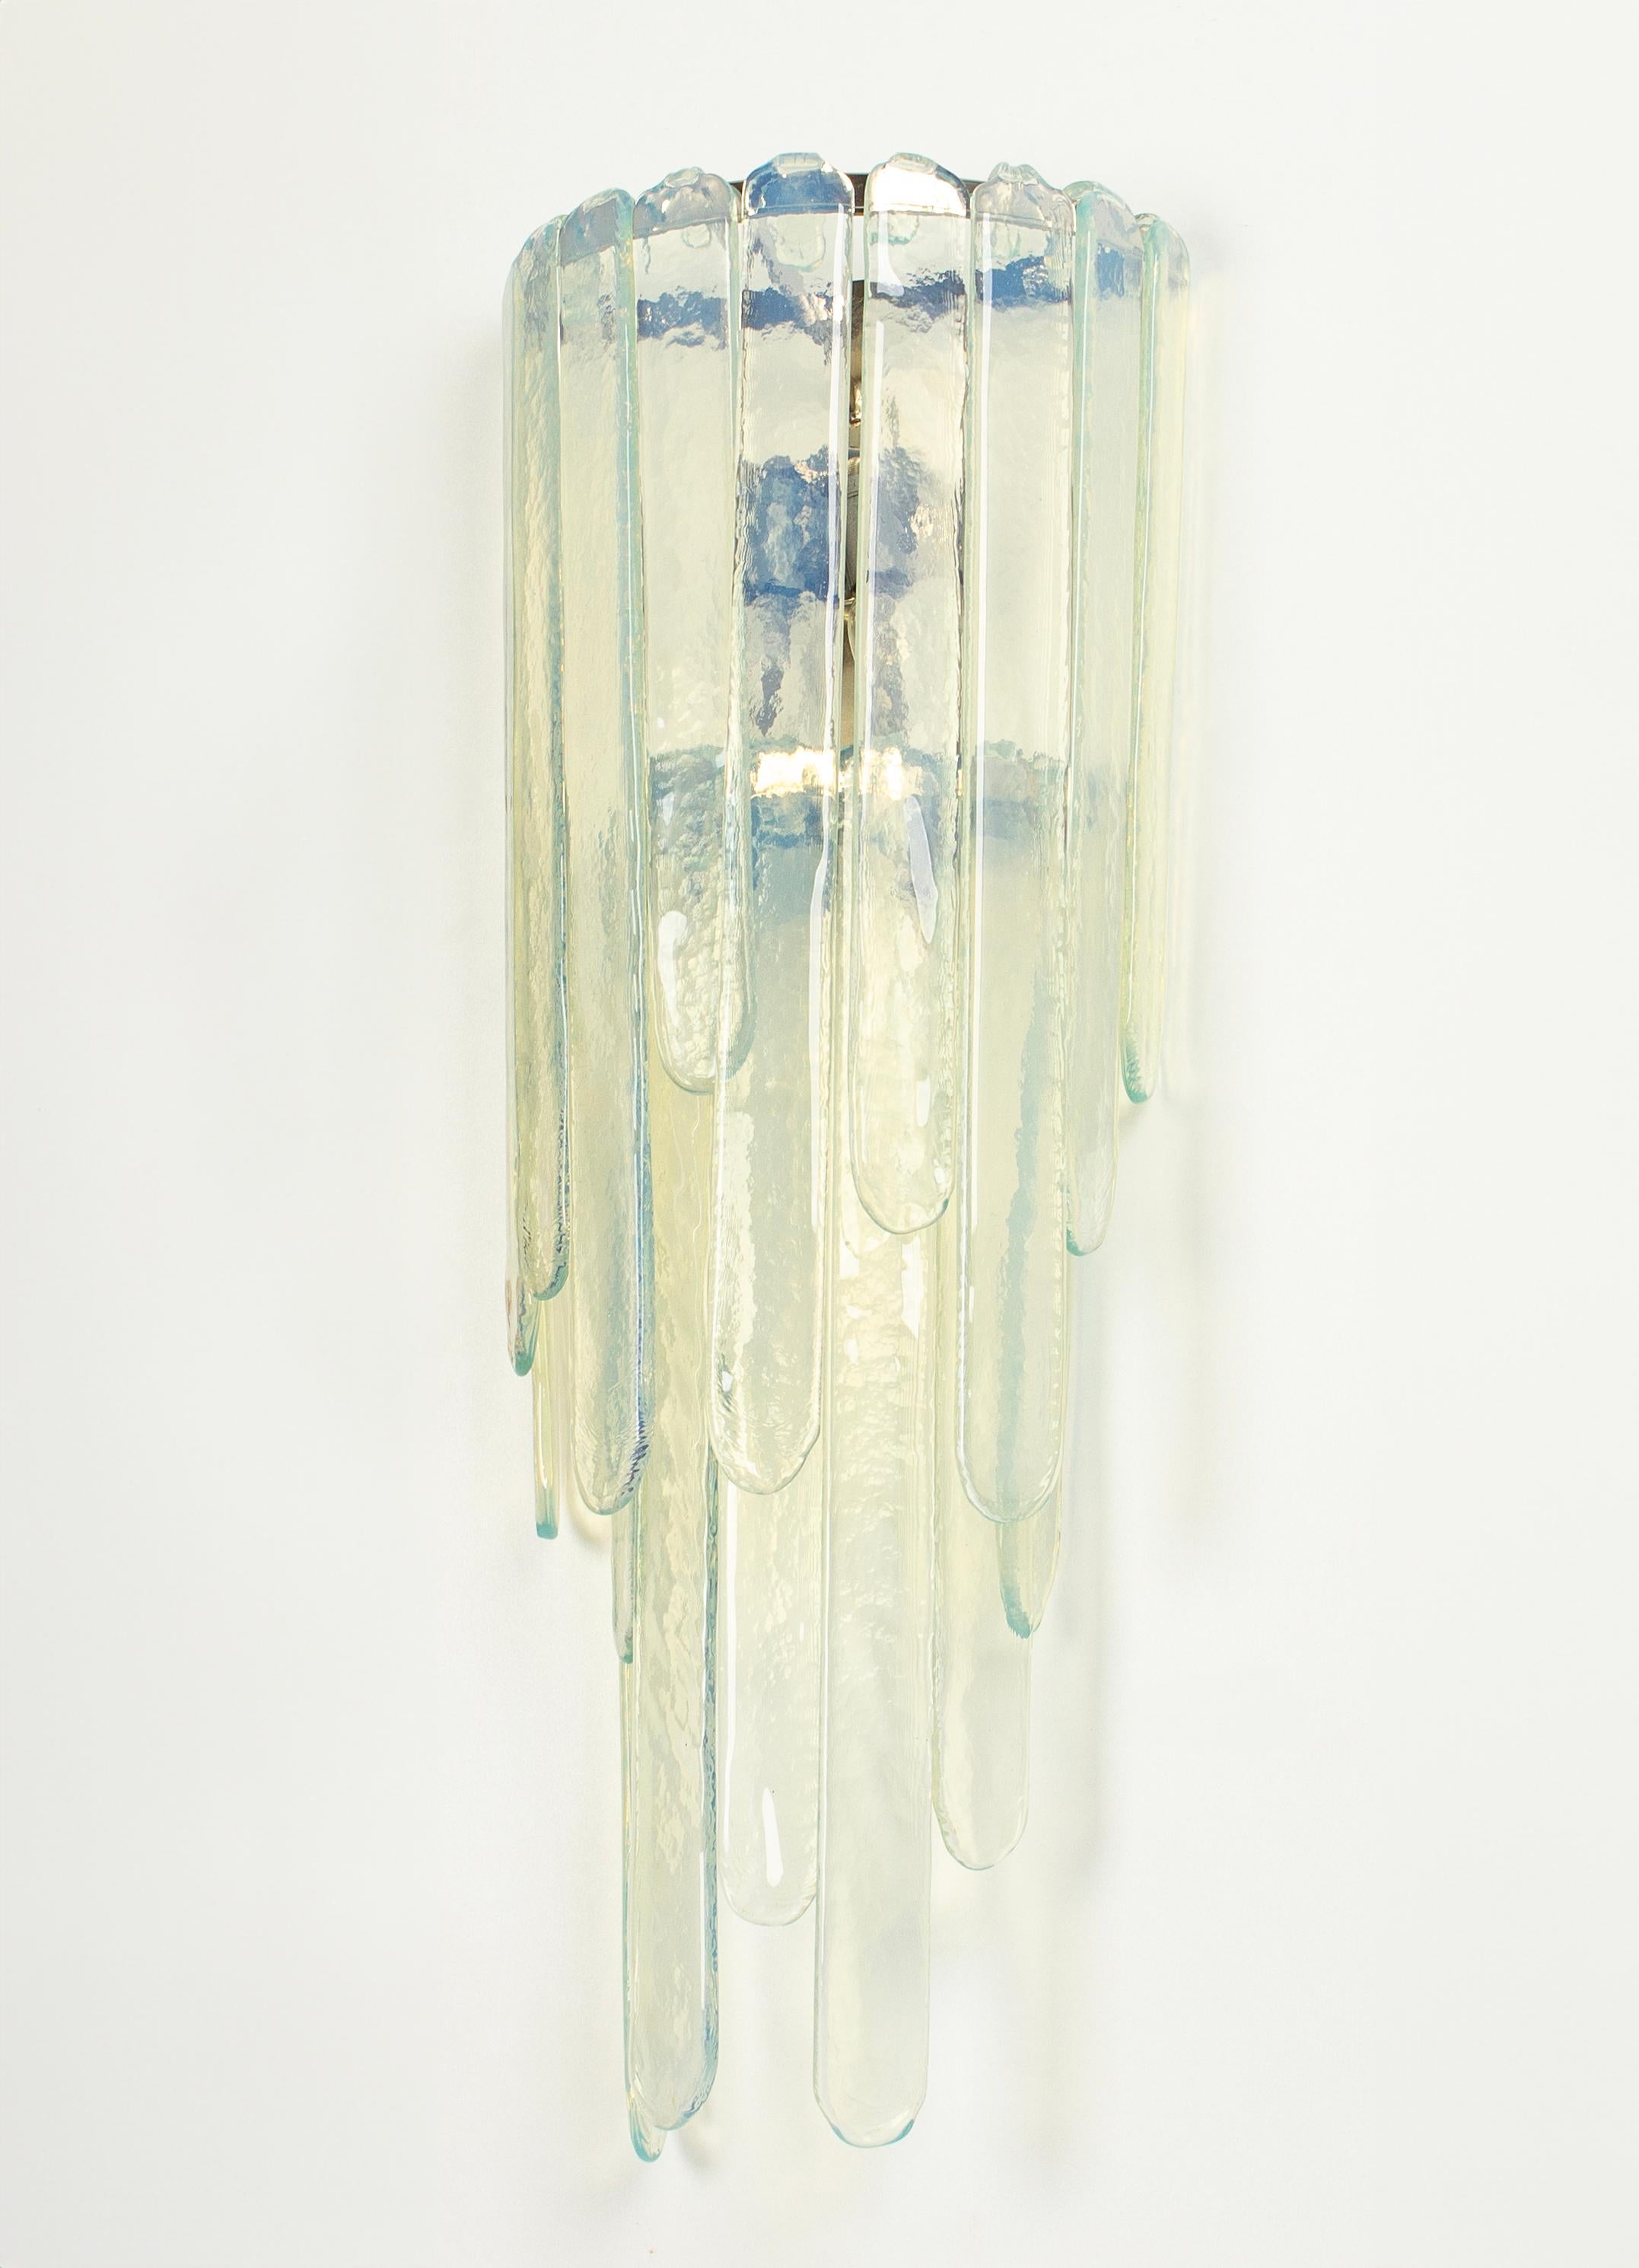 Extra Large Blue Murano Glass Wall Lamp by Carlo Nason for Mazzega, Italy, 1970s For Sale 3